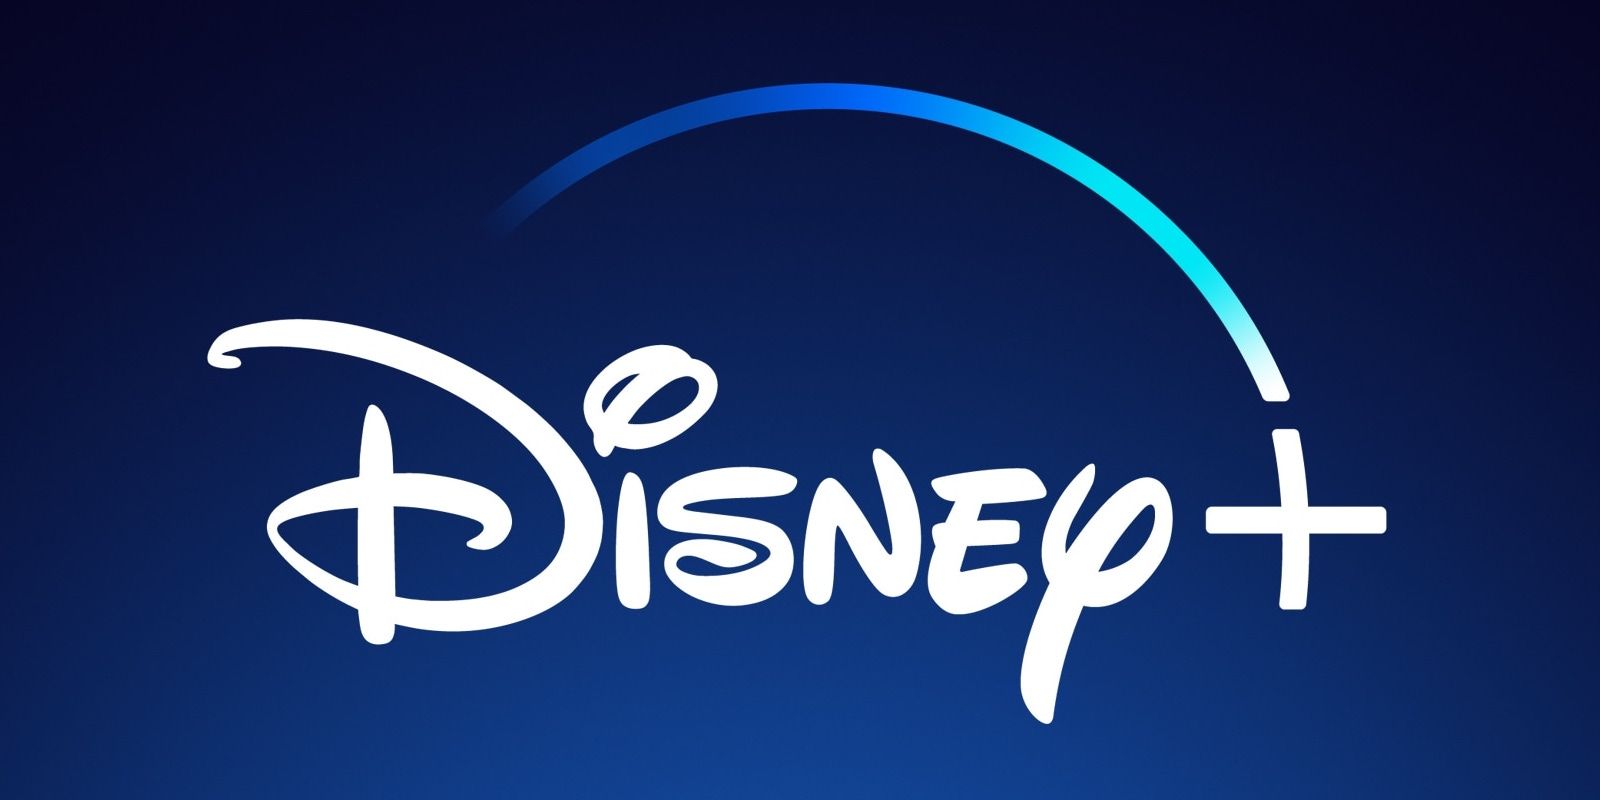 Disney+: Every New Movie & TV Show Coming In August 2022